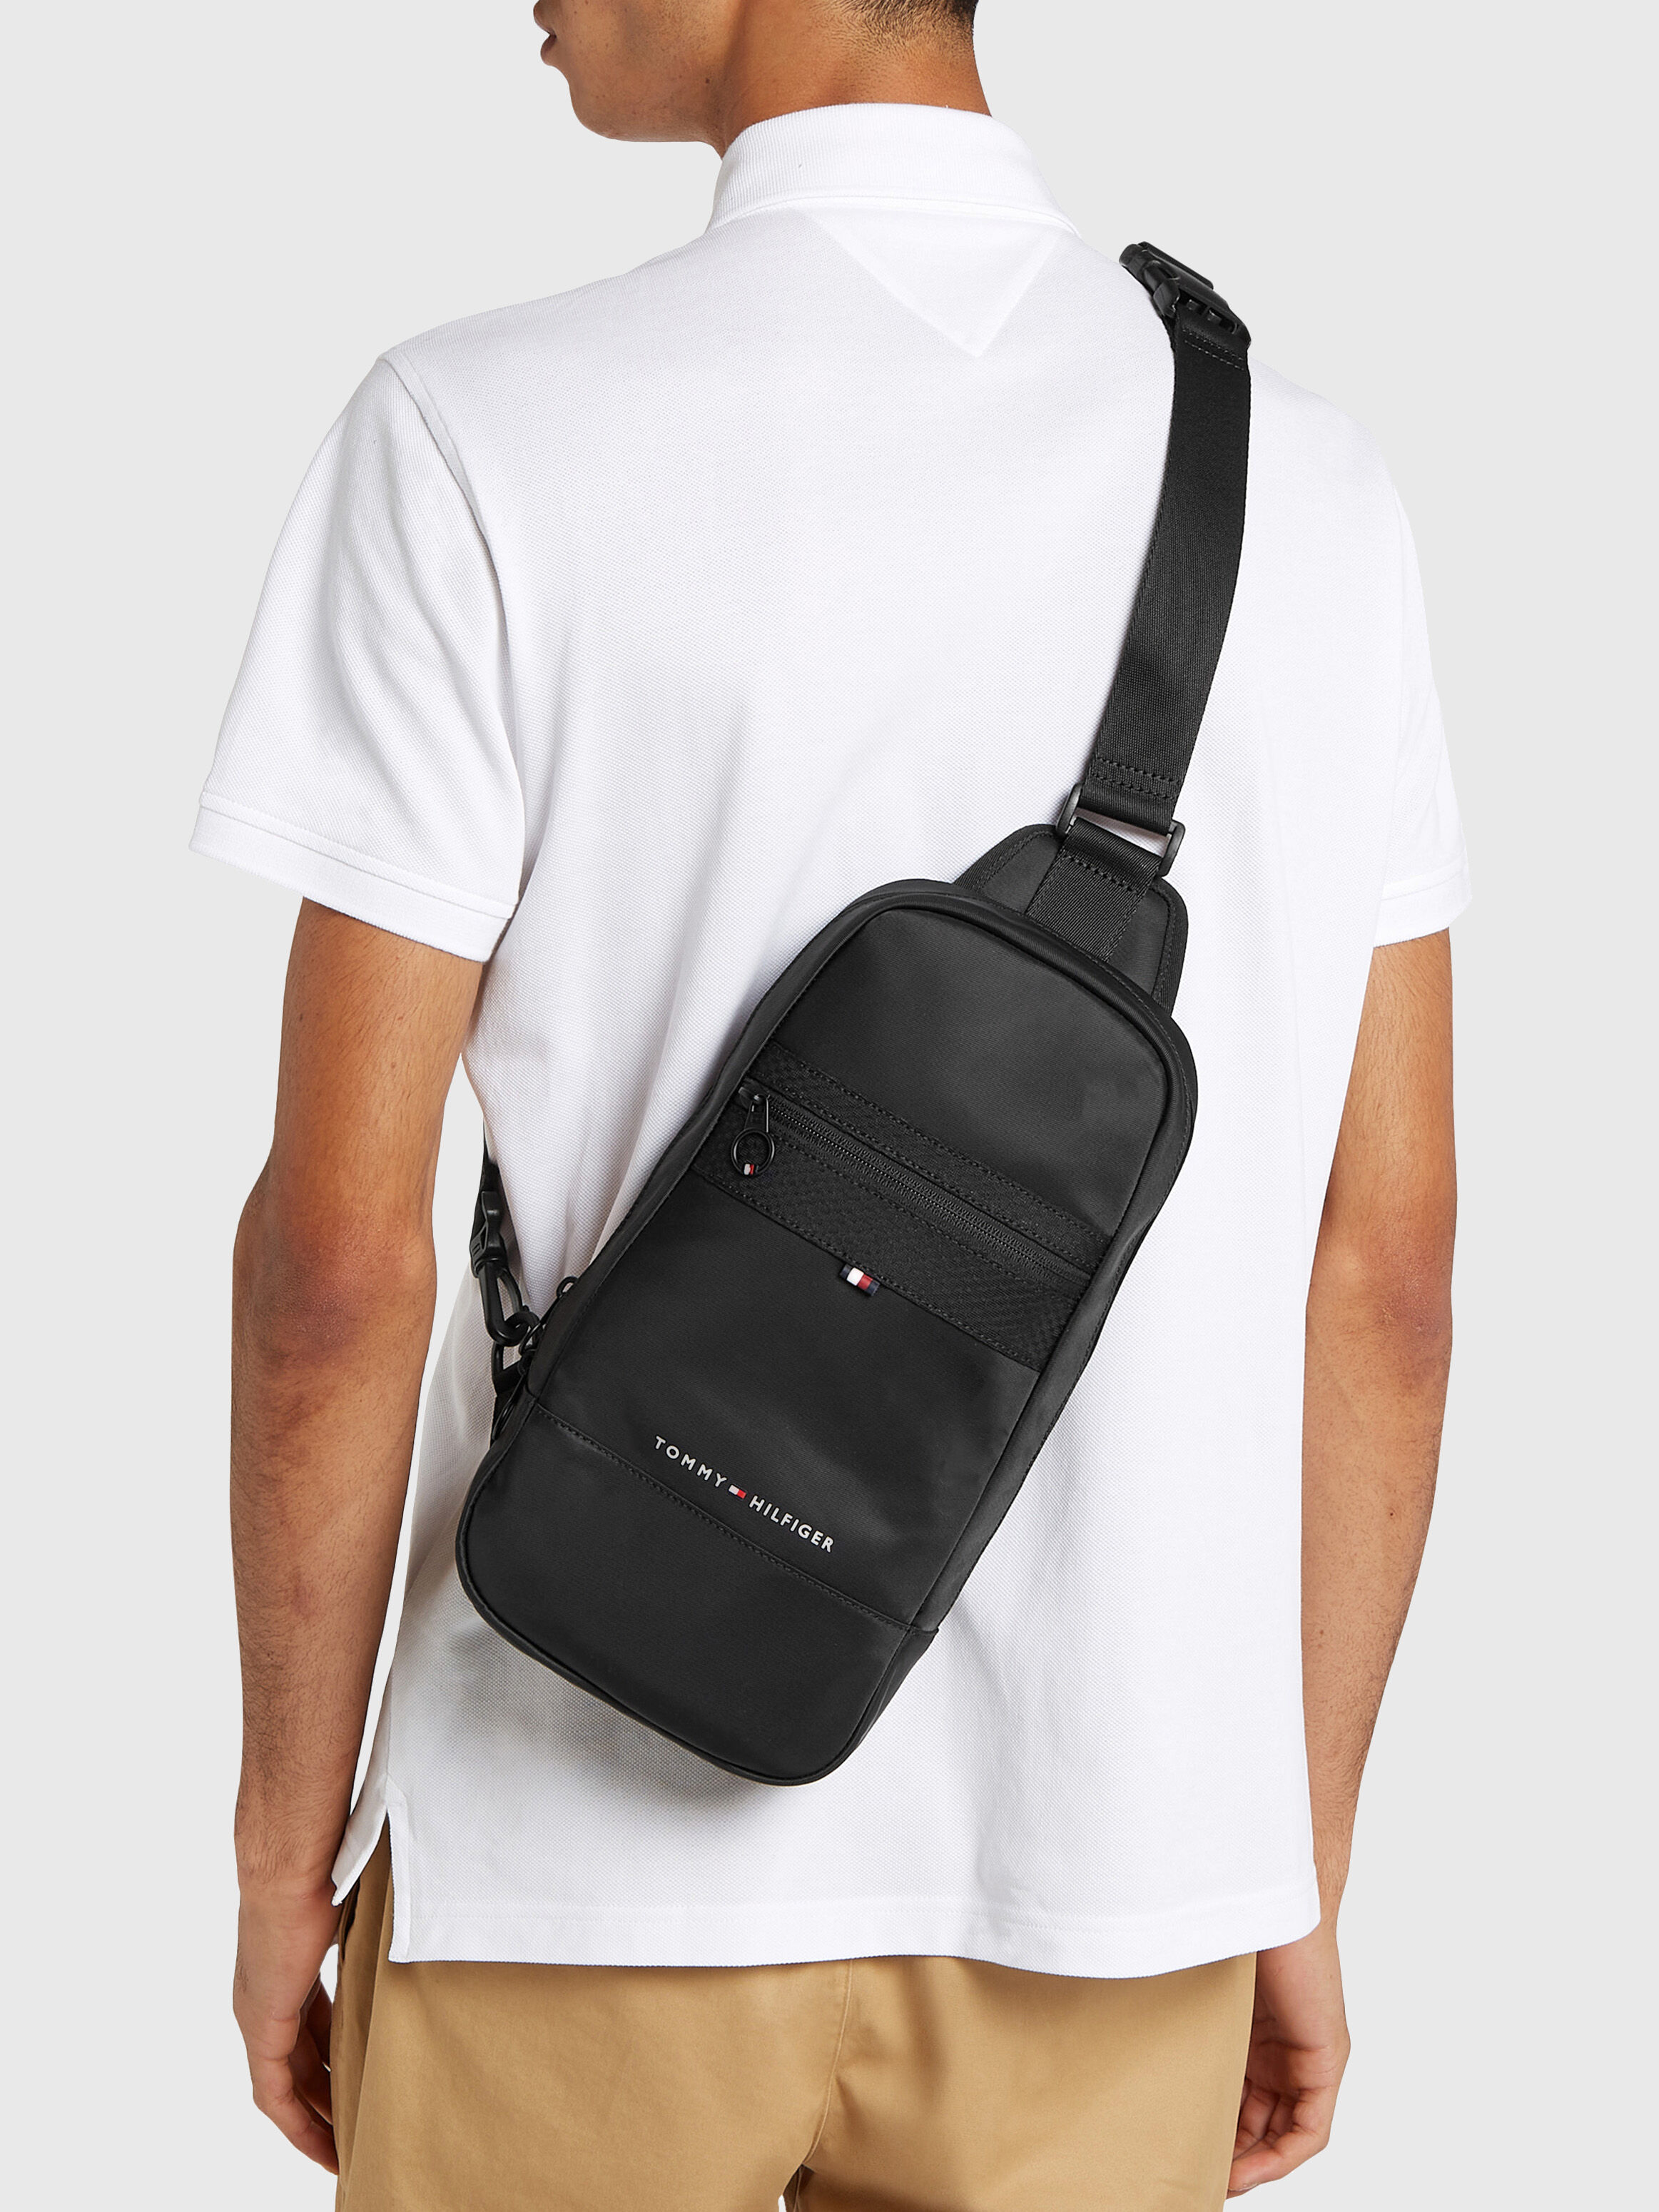 Buy Waist Bag For Men Online In India At Lowest Prices  Tata CLiQ